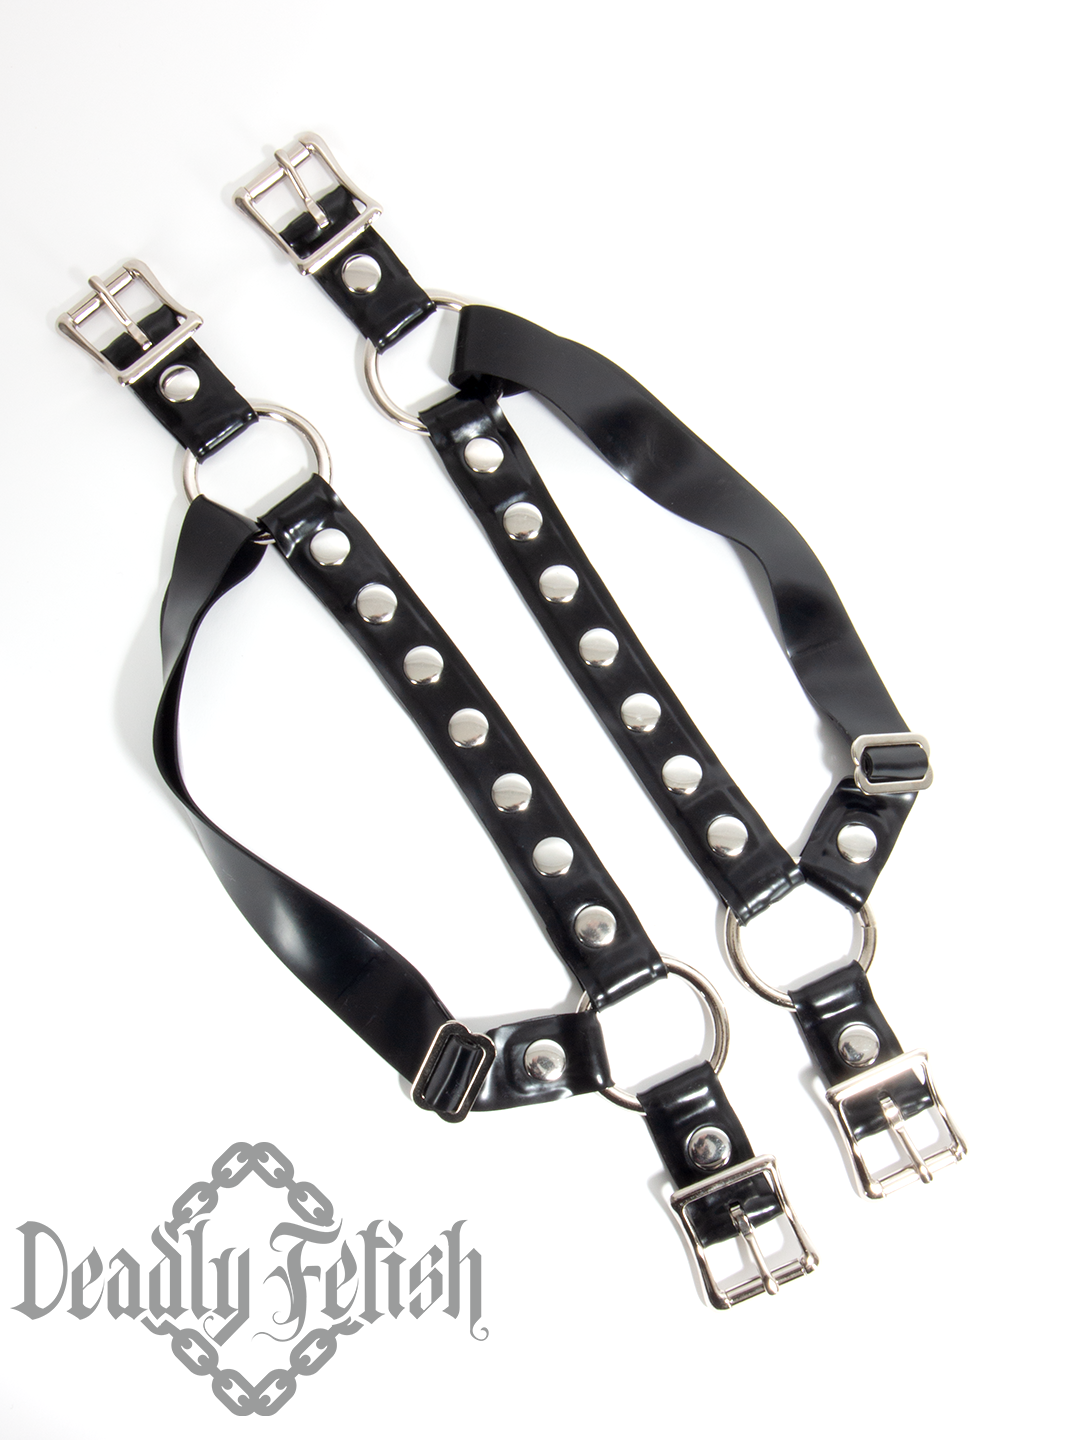 Deadly Fetish Latex: Harness Addition #27 Riveted Leg Straps